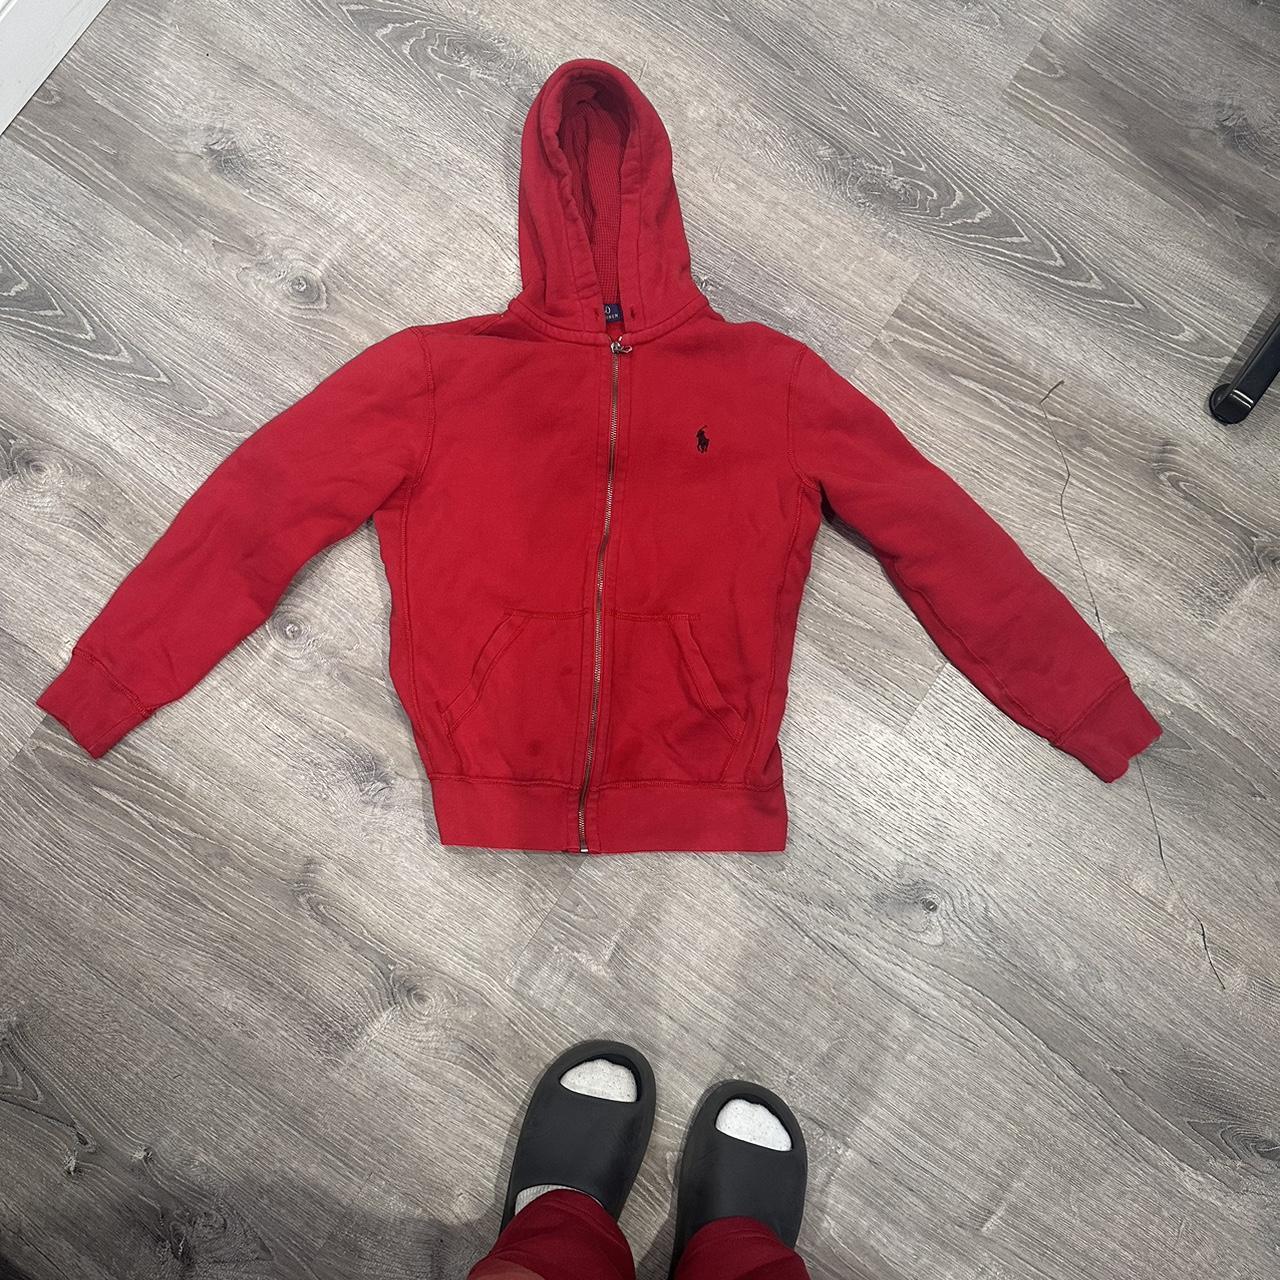 Red Polo Zipup sizing last picture - Depop